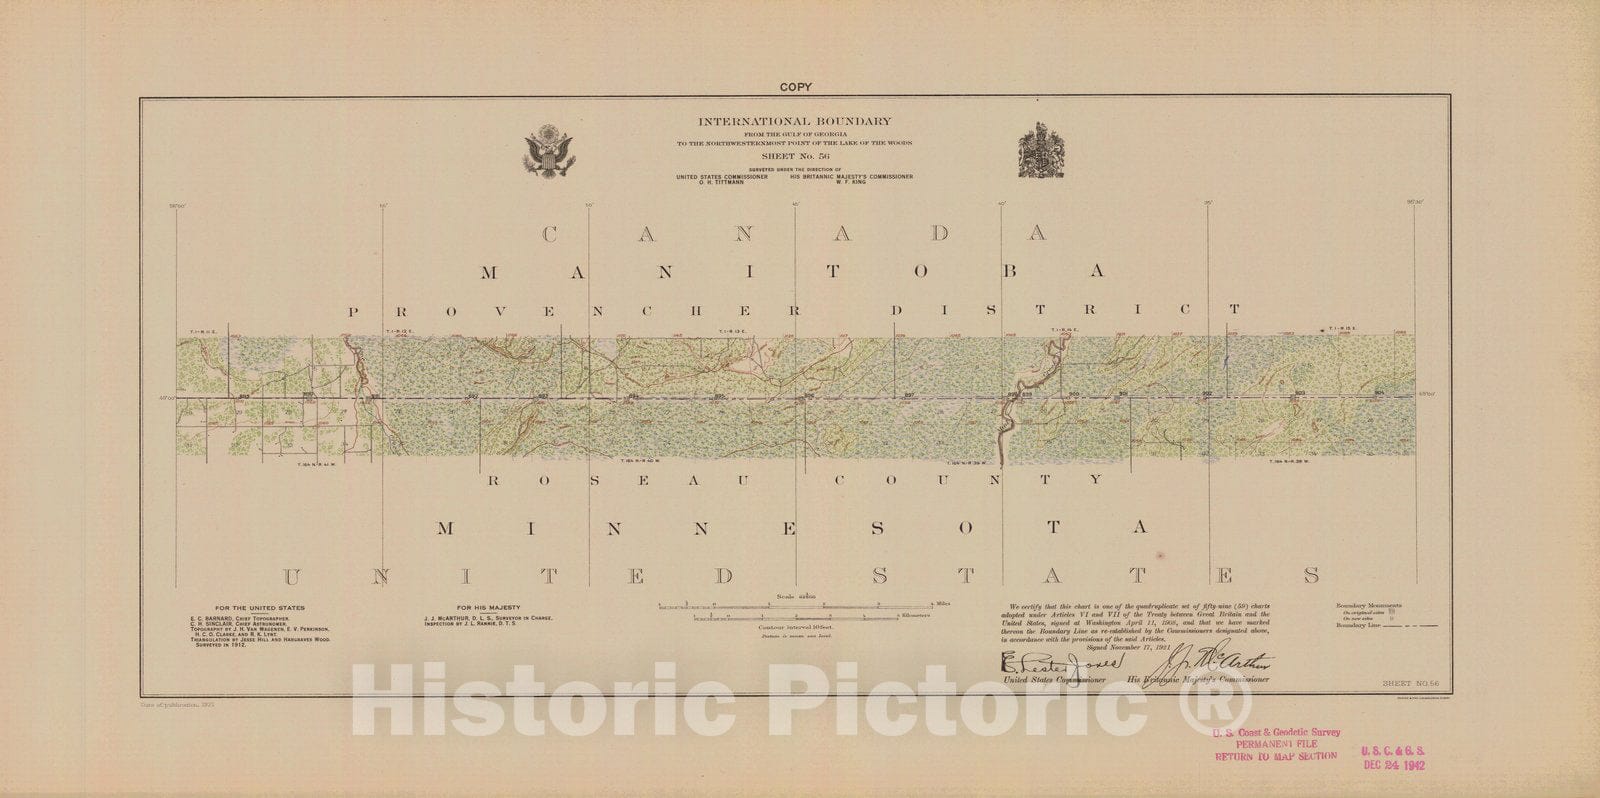 Historic Nautical Map - International Boundary, From The Gulf Of Georgia To The Northwestern Point Of The Lake To The Woods, Sheet No. 56, MN, 1921 NOAA Topographic - Vintage Poster Wall Art Reprint - 0